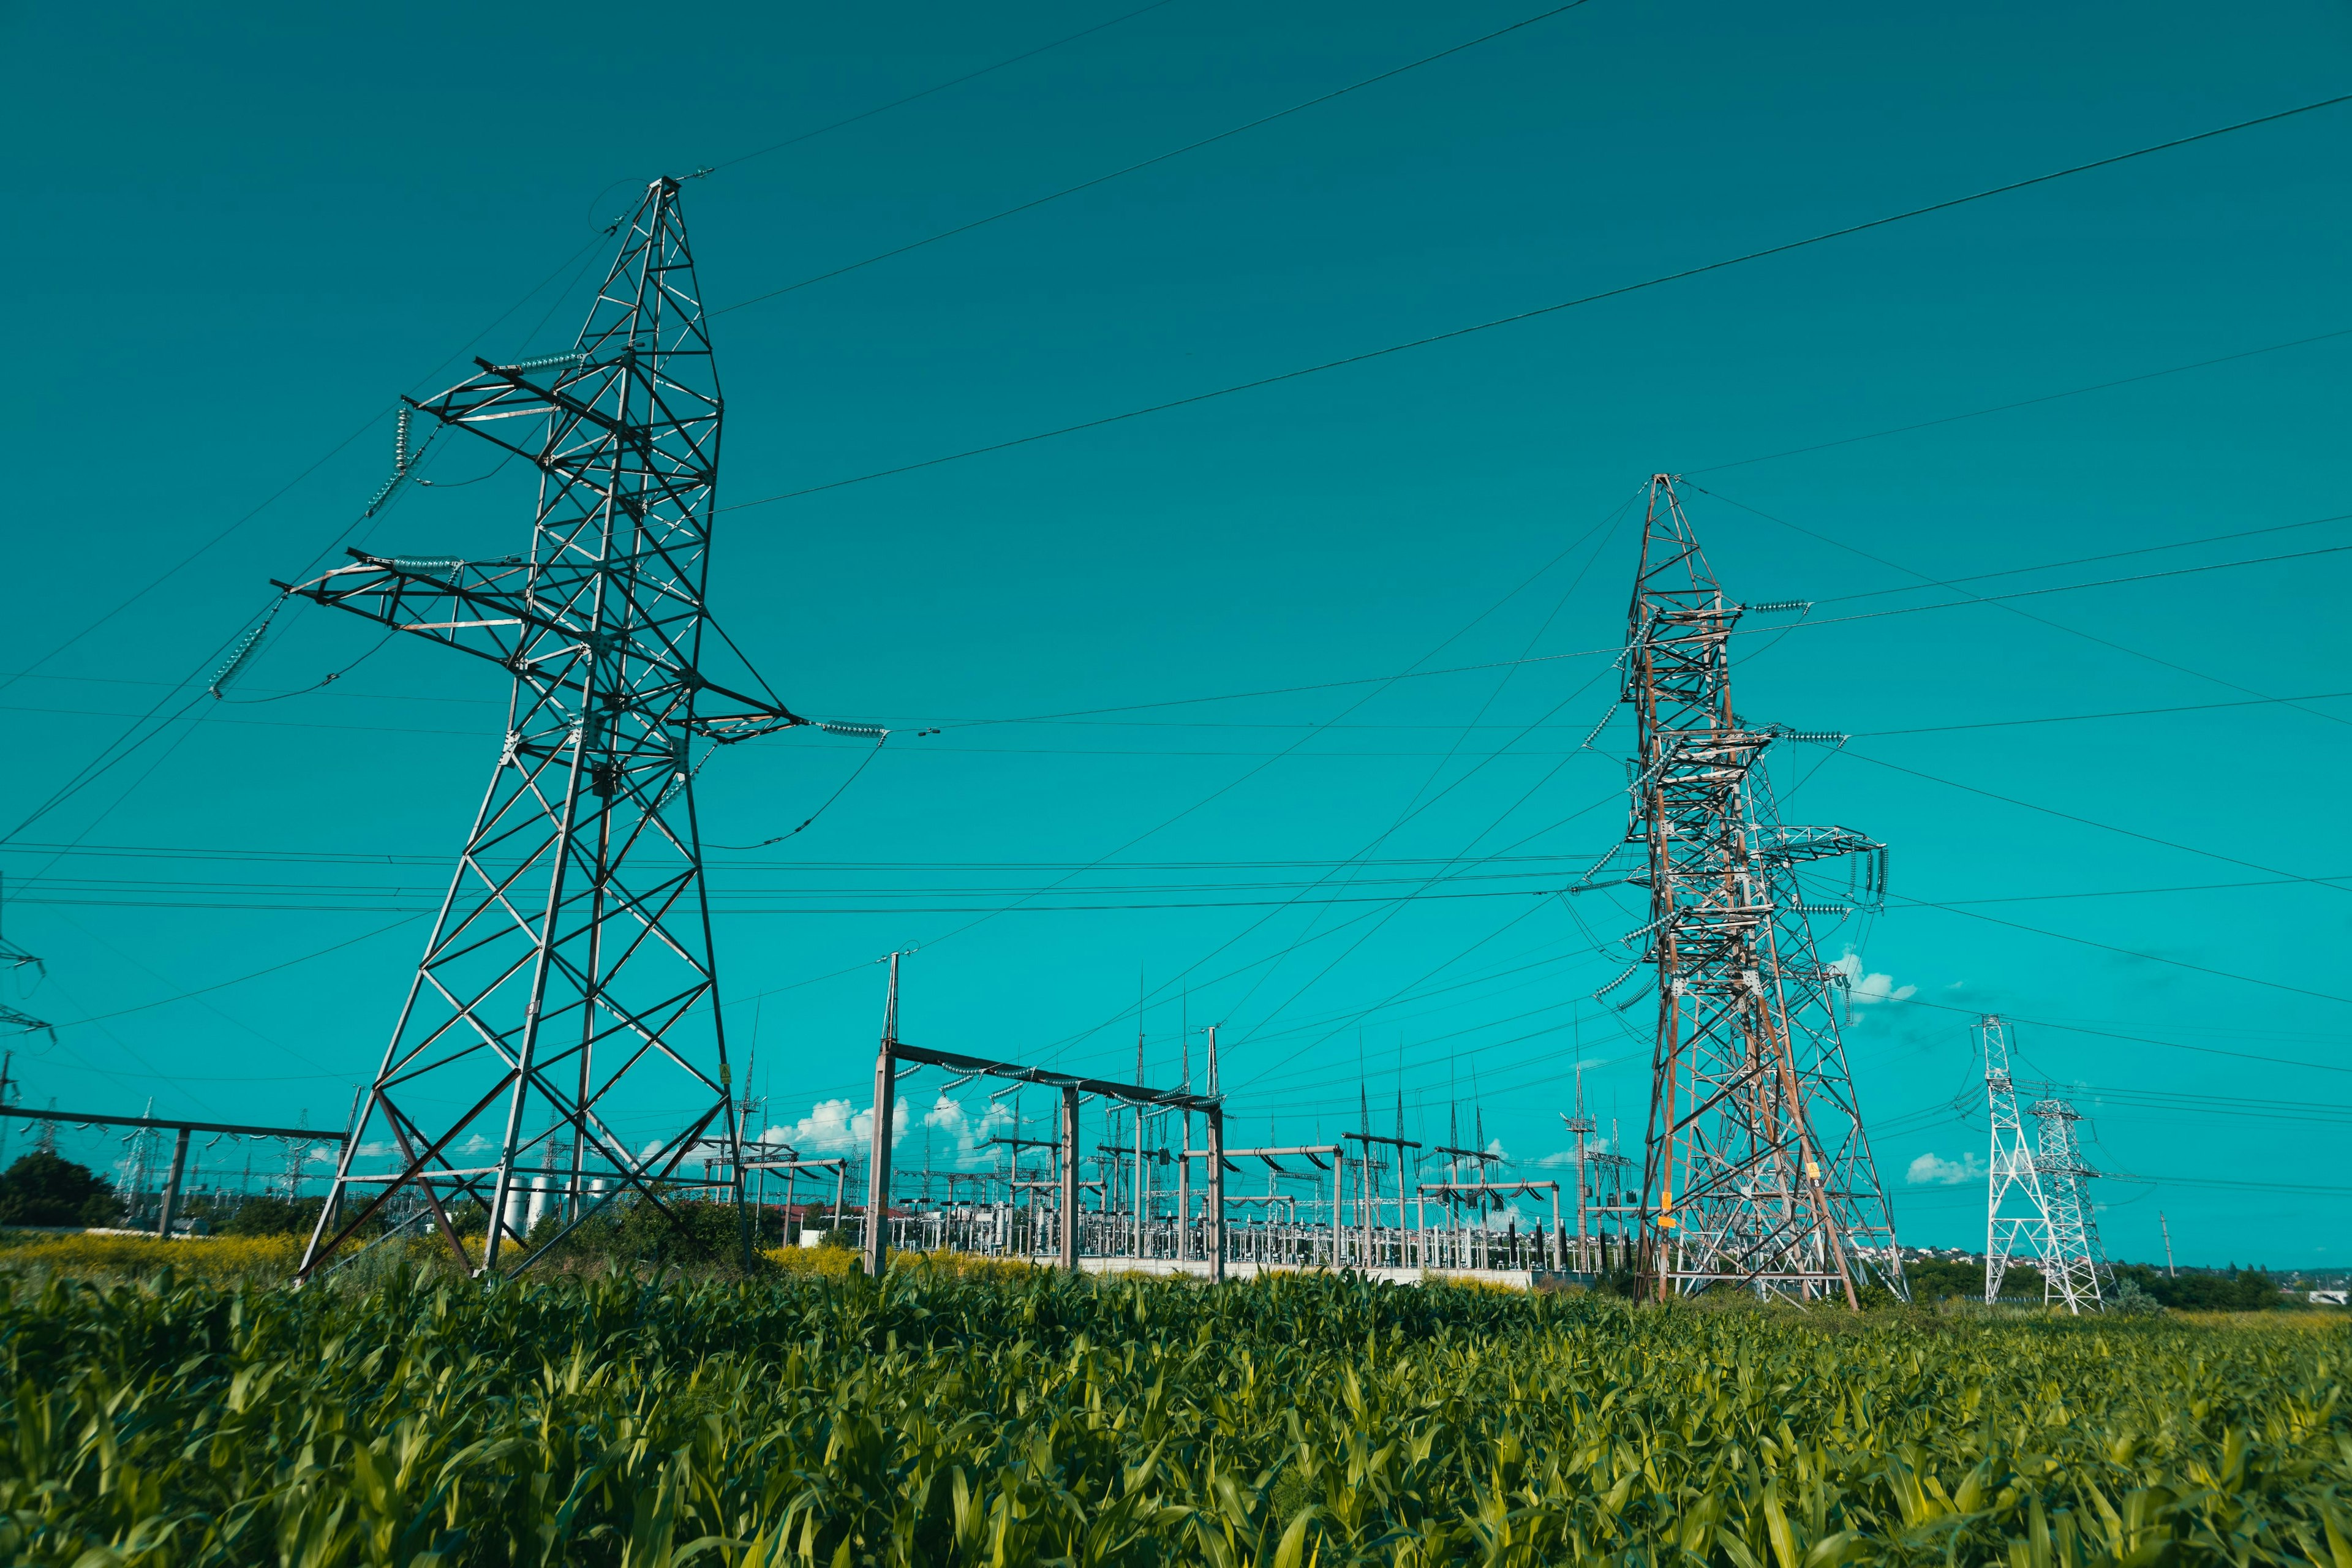 Image of high-voltage transmission towers